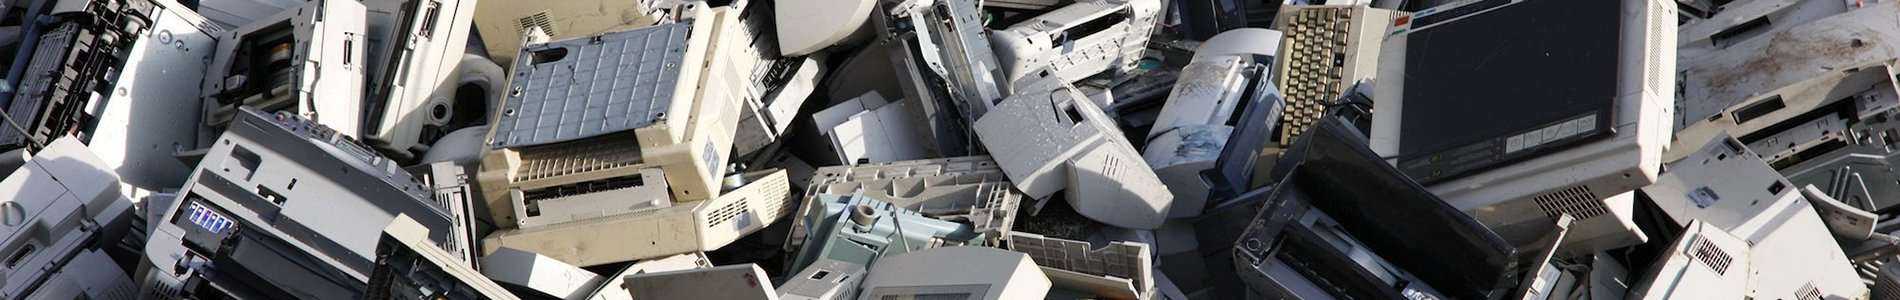 electrical waste recycling